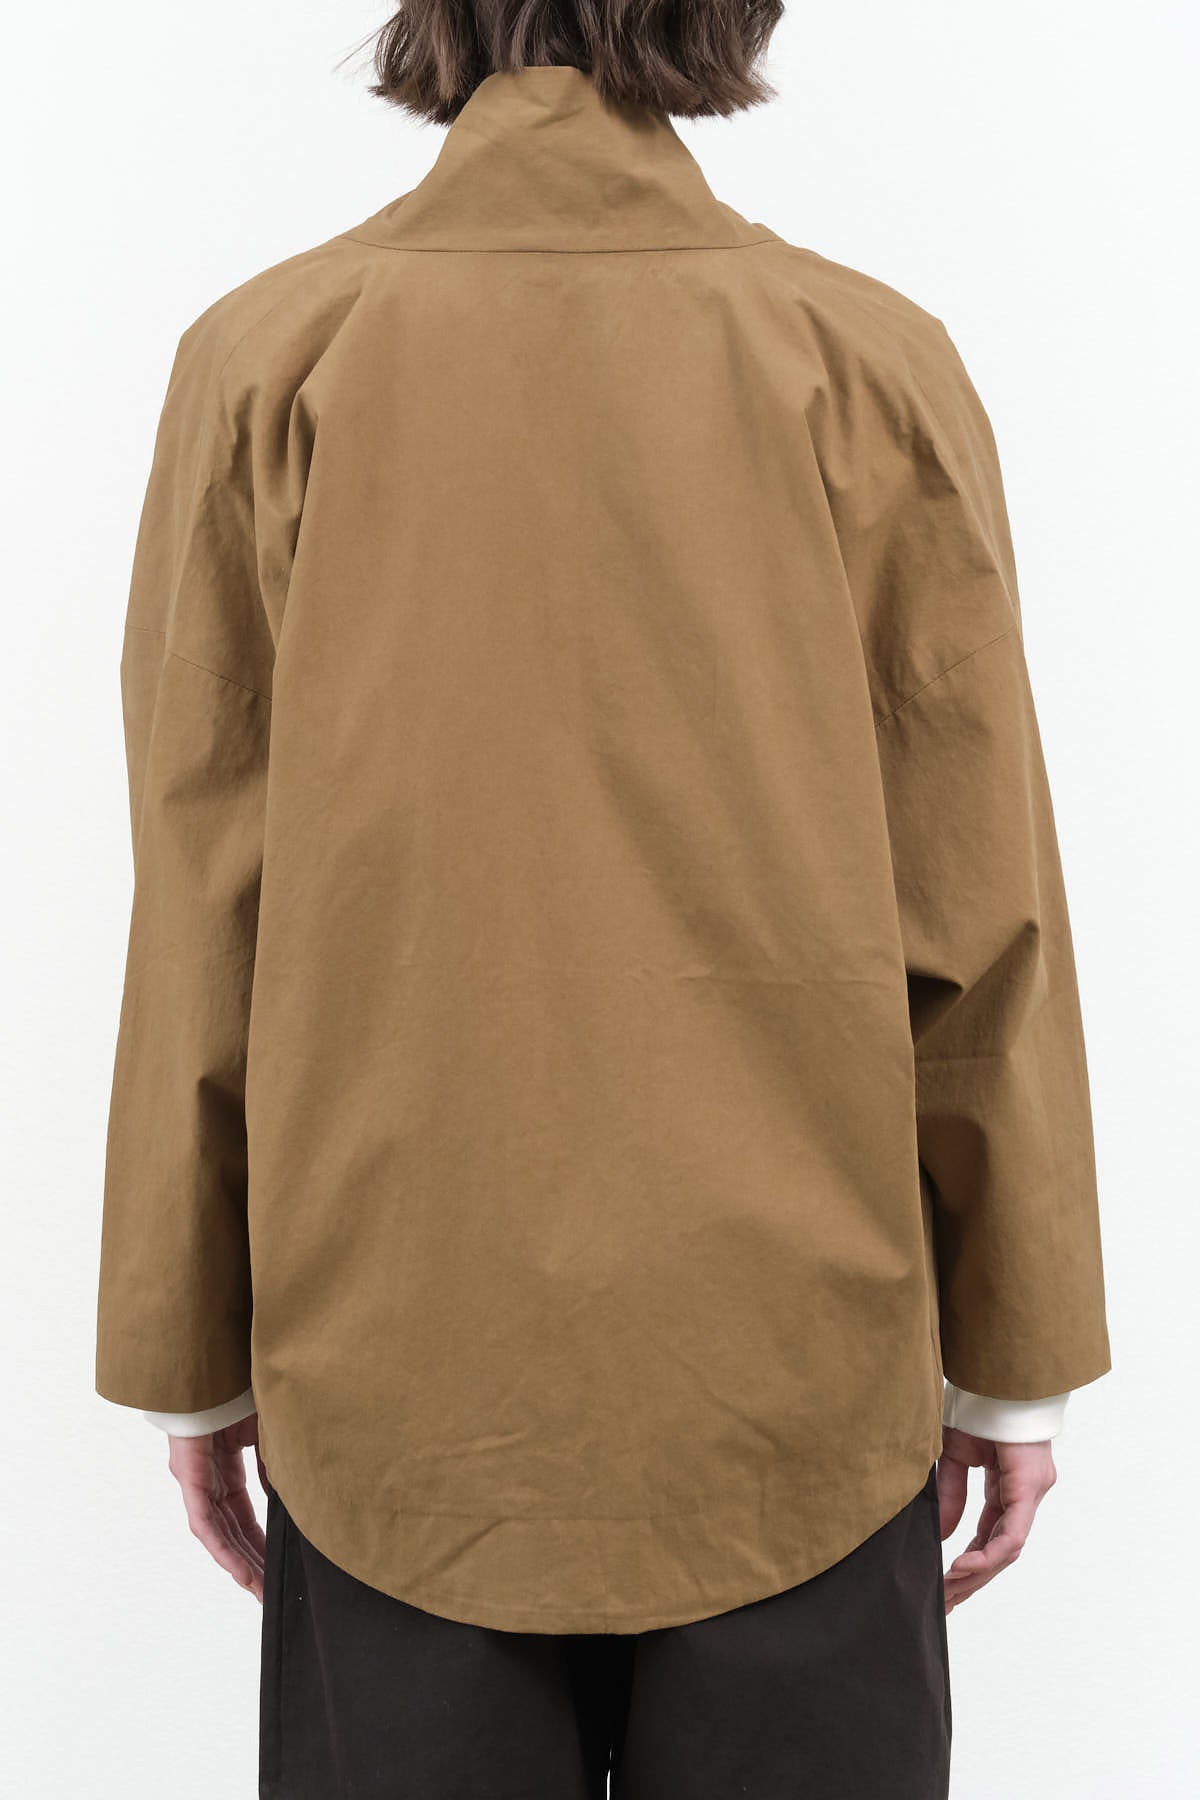 Back view of Signature Sumo Jacket